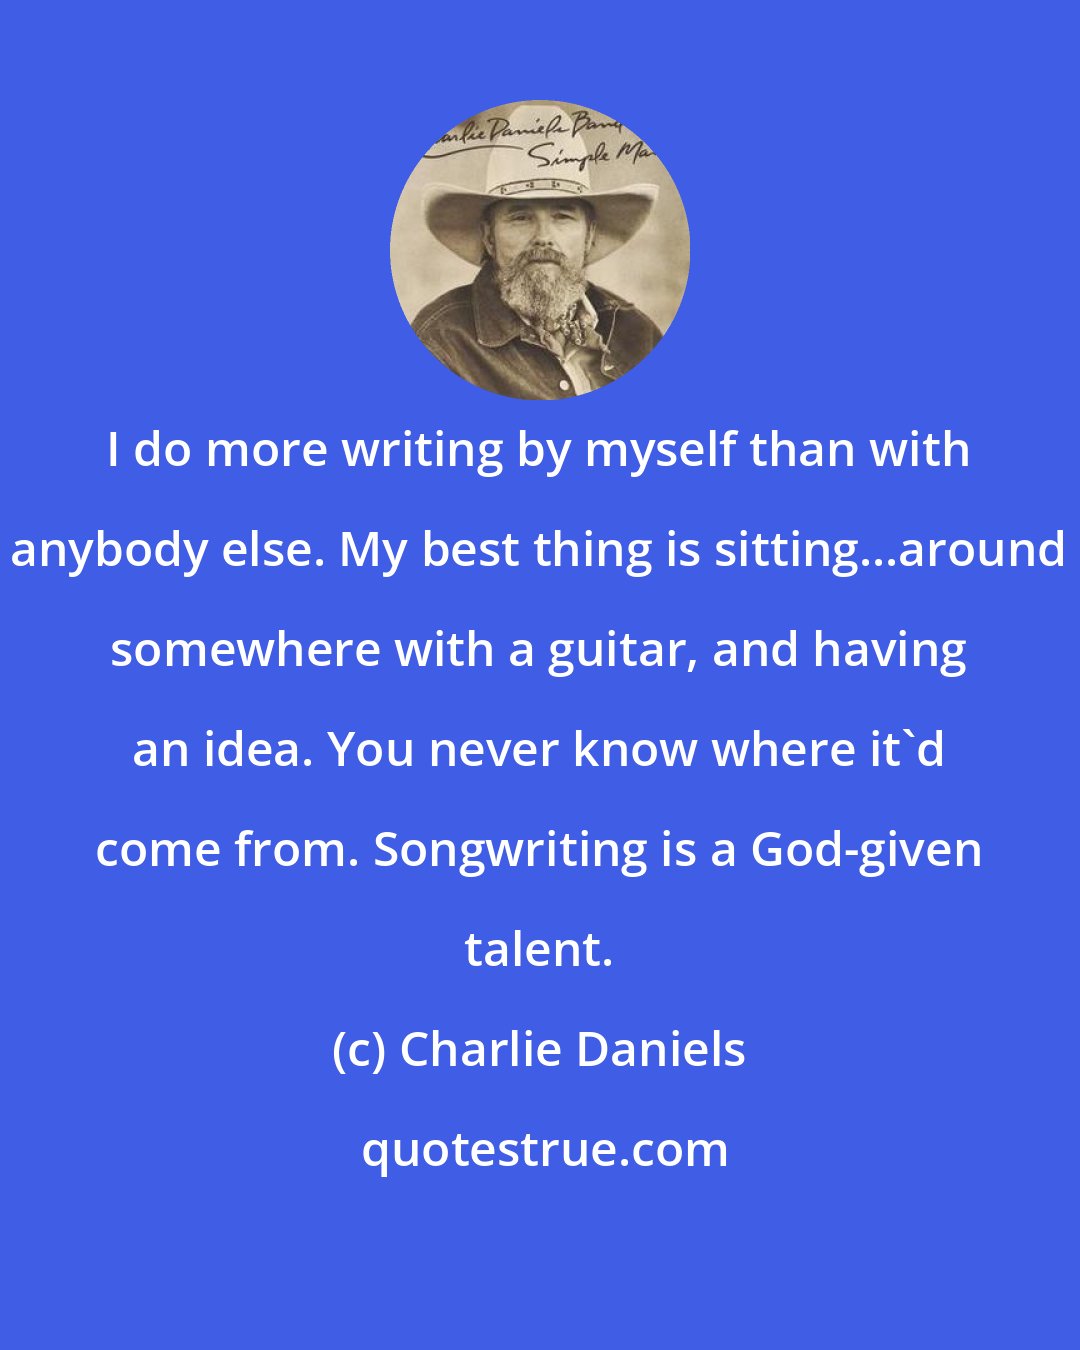 Charlie Daniels: I do more writing by myself than with anybody else. My best thing is sitting...around somewhere with a guitar, and having an idea. You never know where it'd come from. Songwriting is a God-given talent.